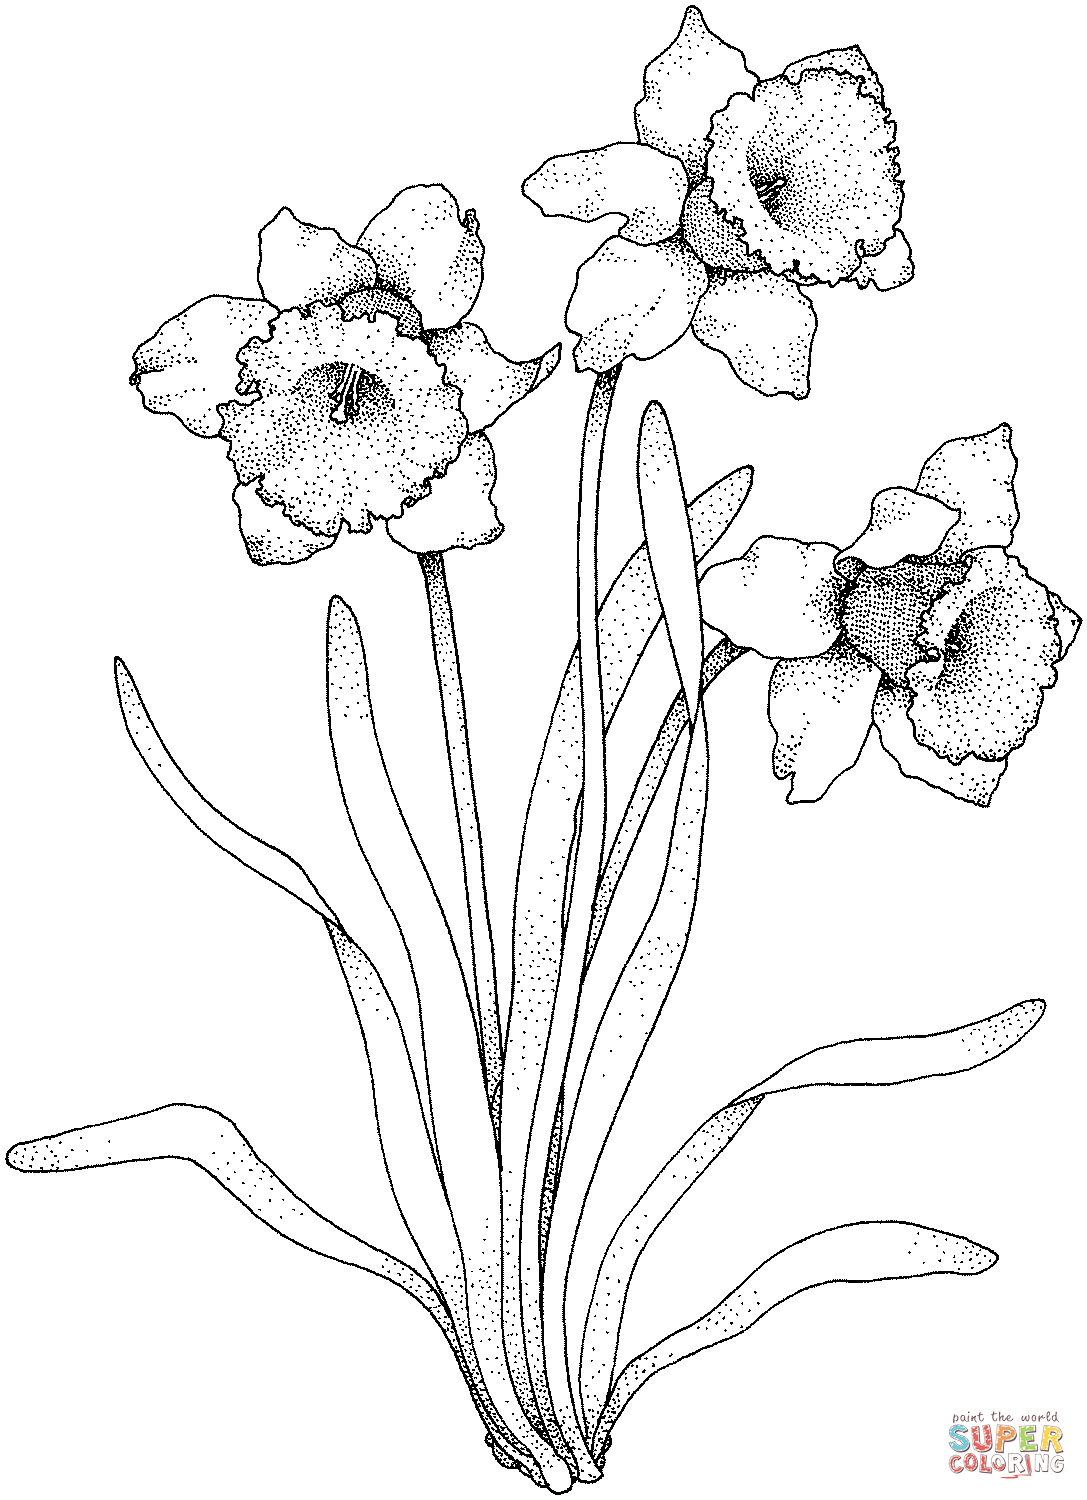 Daffodil coloring pages | Free Coloring Pages